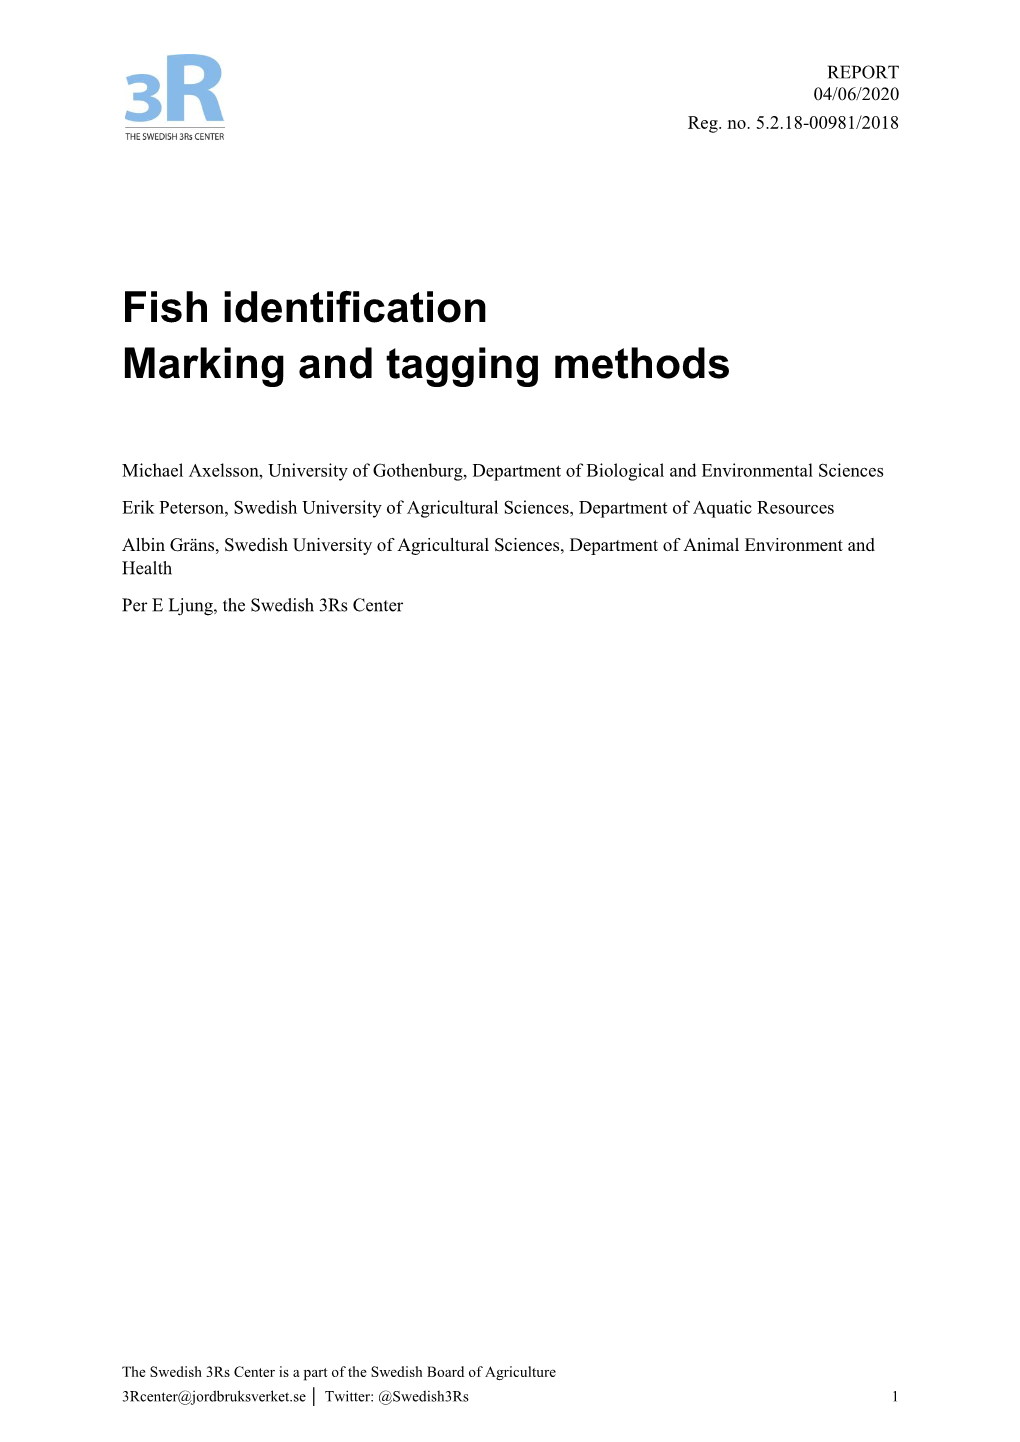 Fish Identification Marking and Tagging Methods